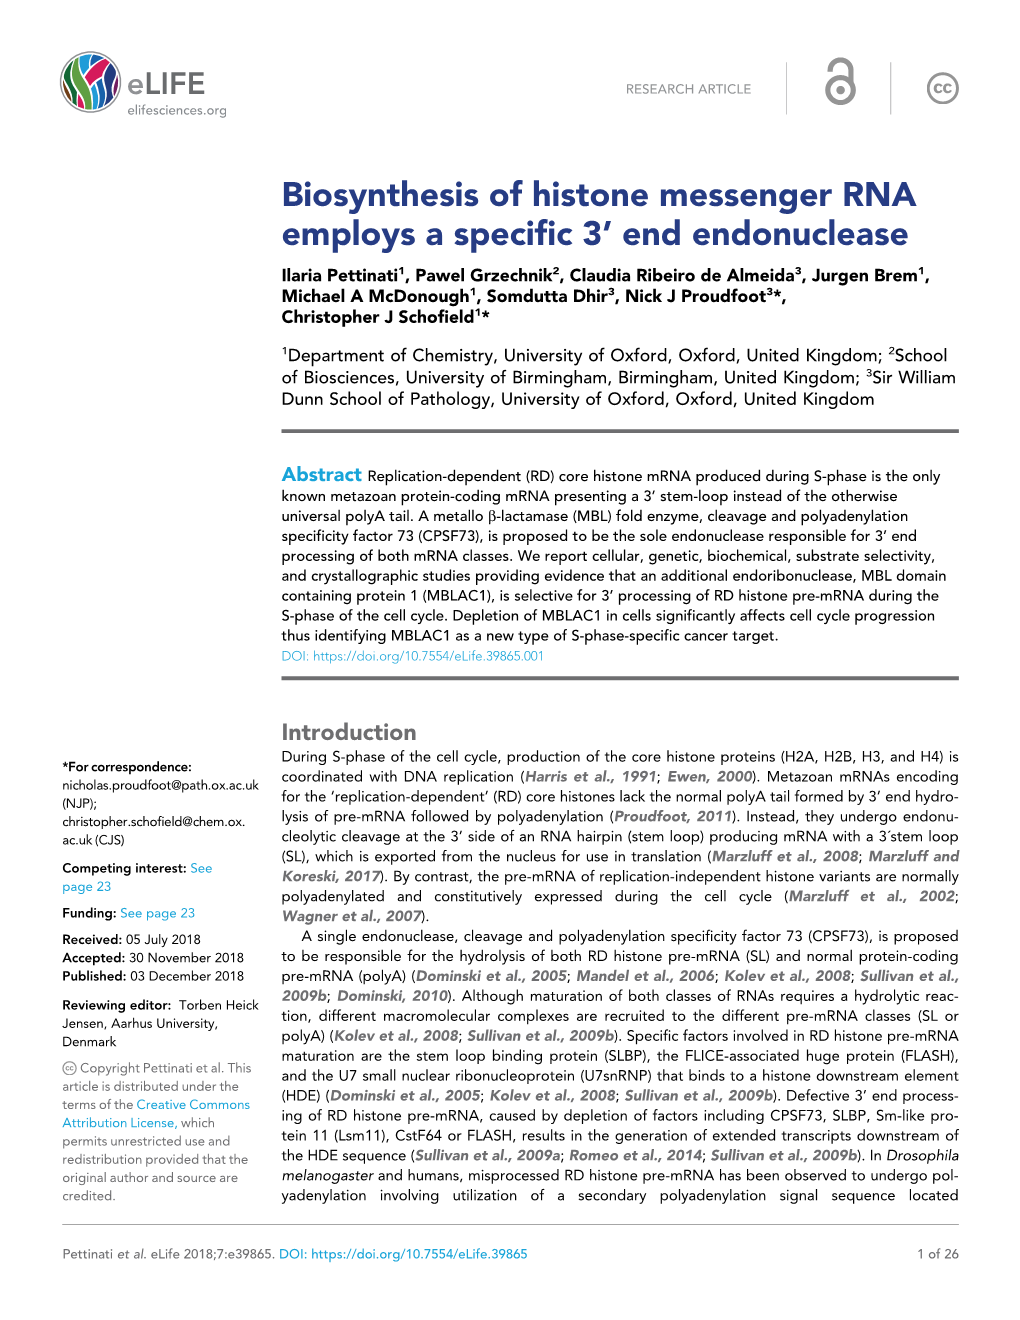 Biosynthesis of Histone Messenger RNA Employs a Specific 3' End